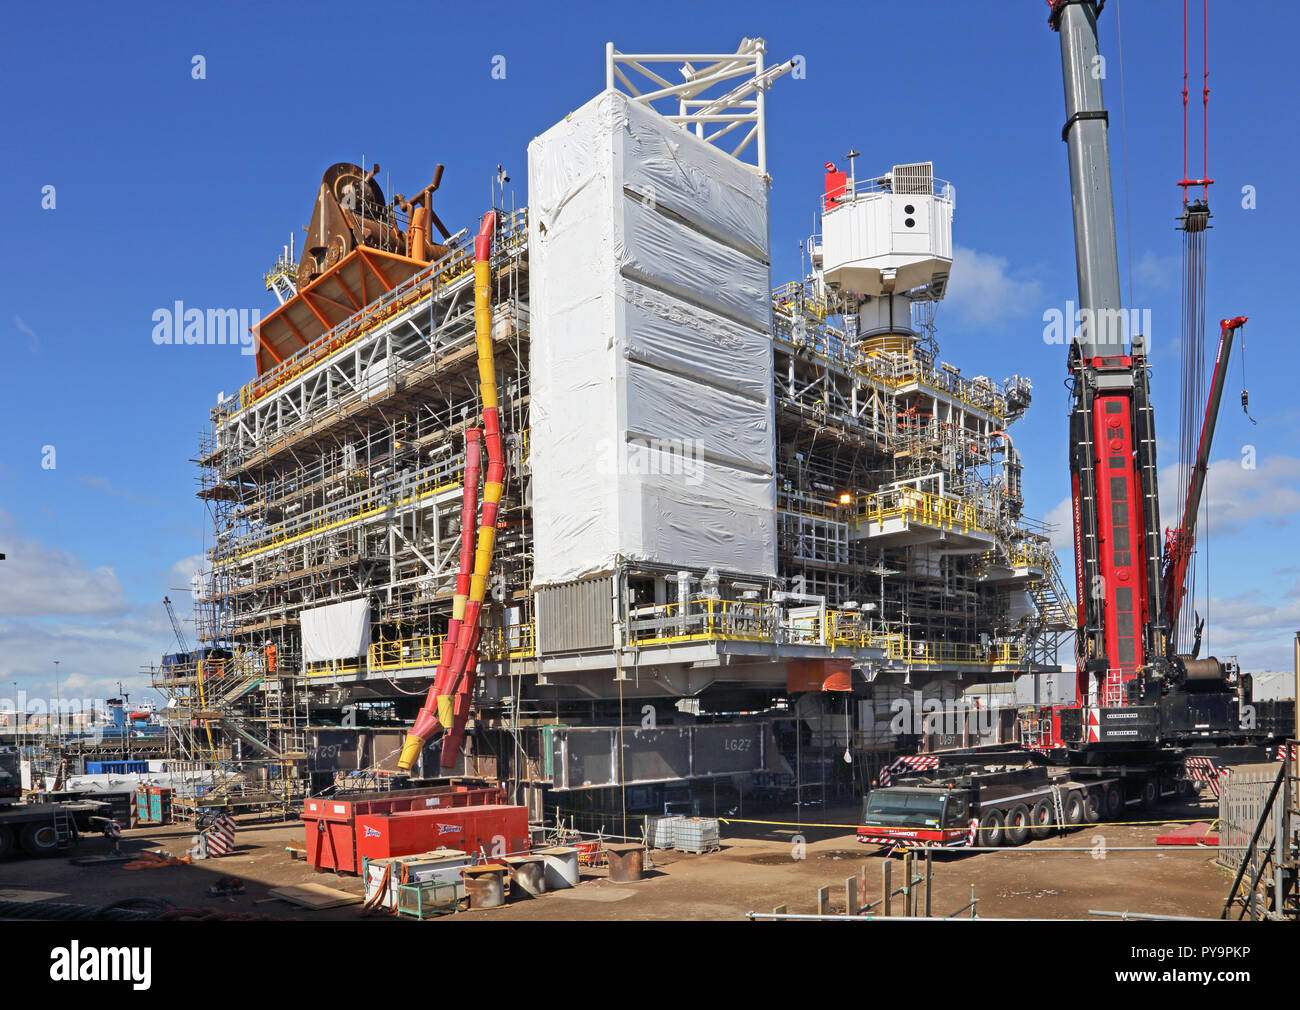 Top-side superstructure of an offshore gas production platform under construction in the North Sea port of Hartlepool, UK Stock Photo